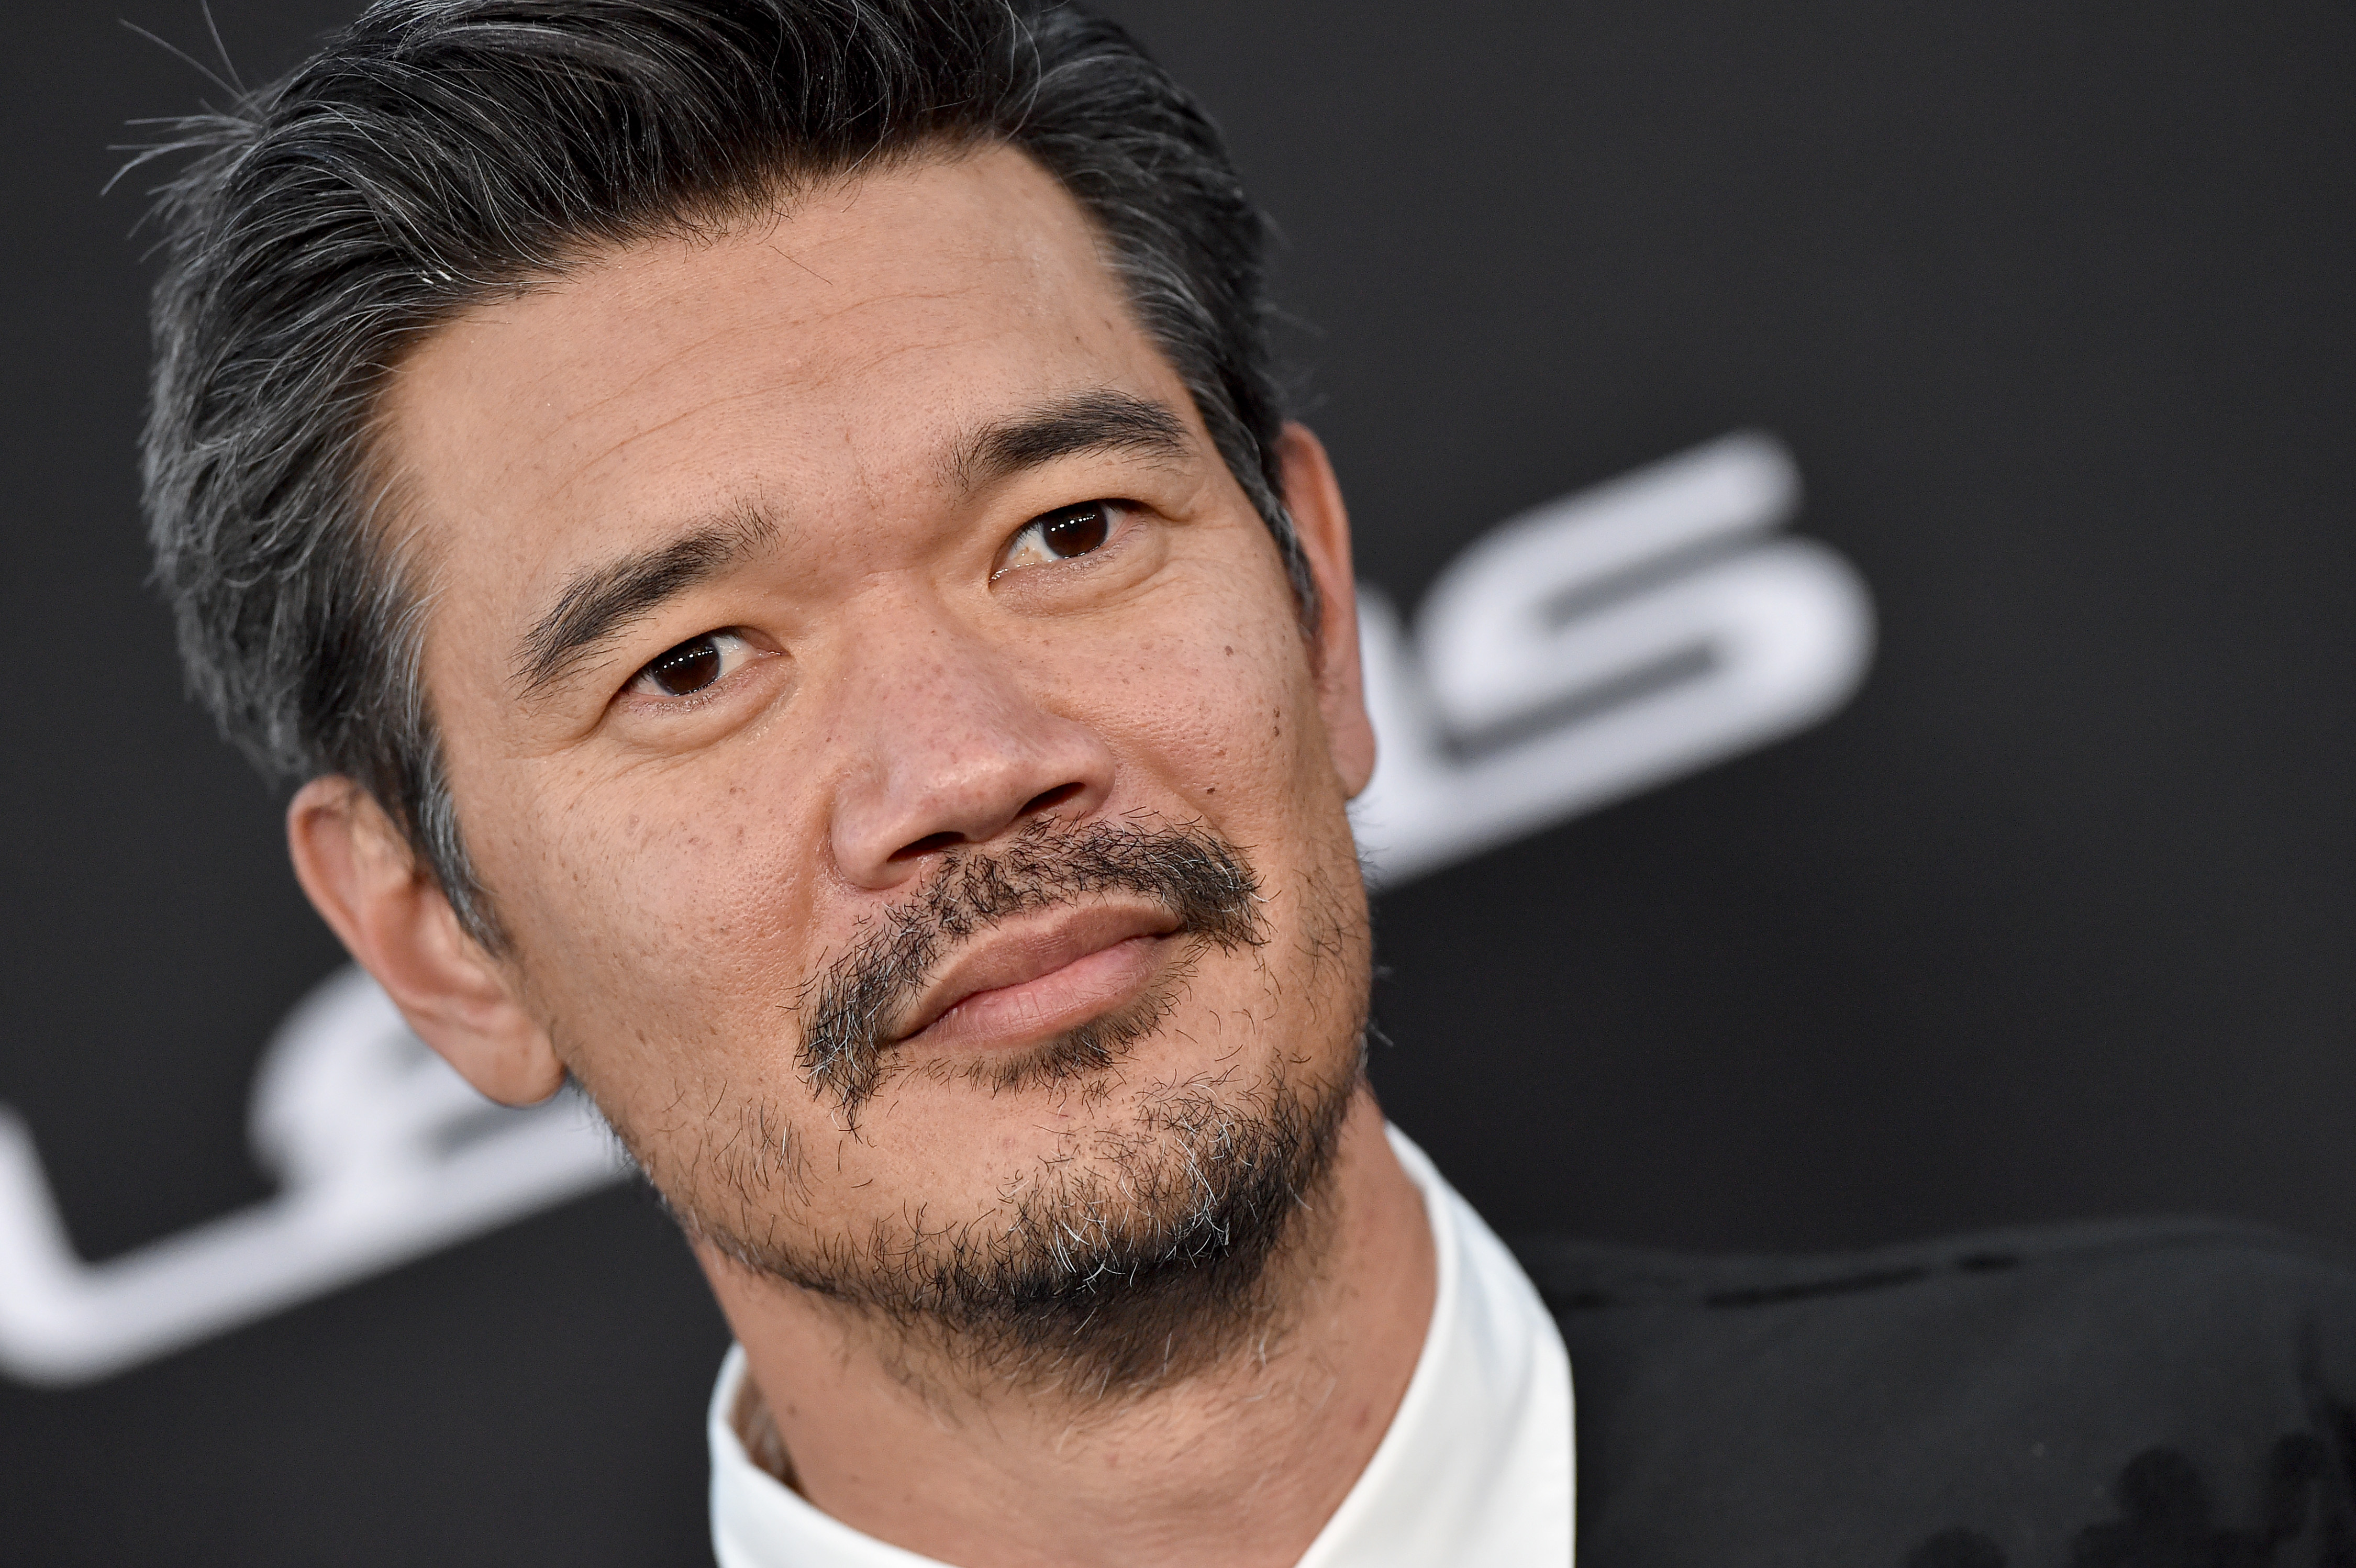 Destin Daniel Cretton, who will direct 'Avengers: The Kang Dynasty,' wears a black suit over a white collared shirt.